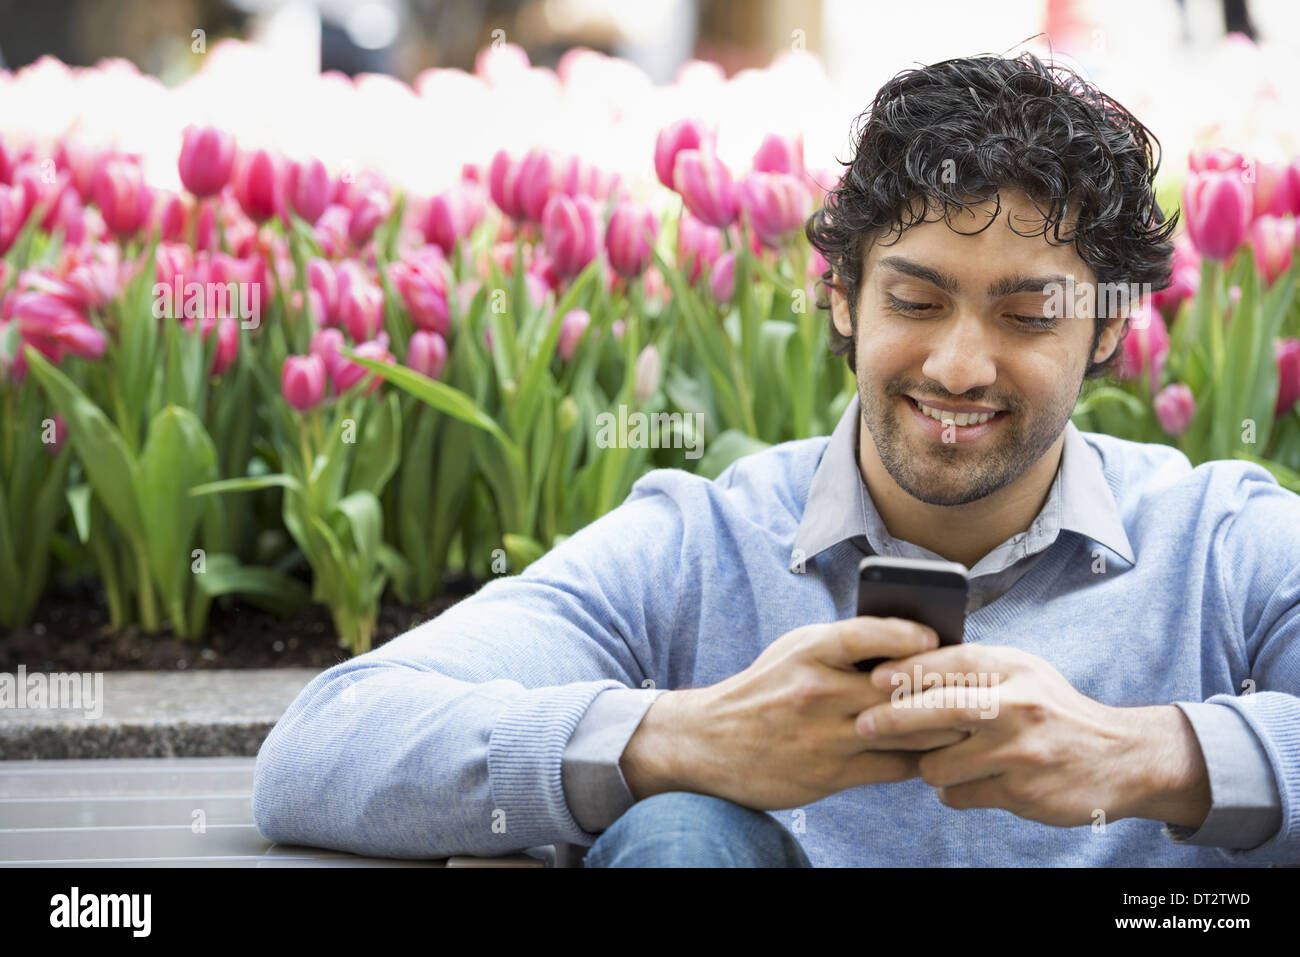 Urban Lifestyle A man in the park using his mobile phone A bed of pink flowering tulips in the background Stock Photo